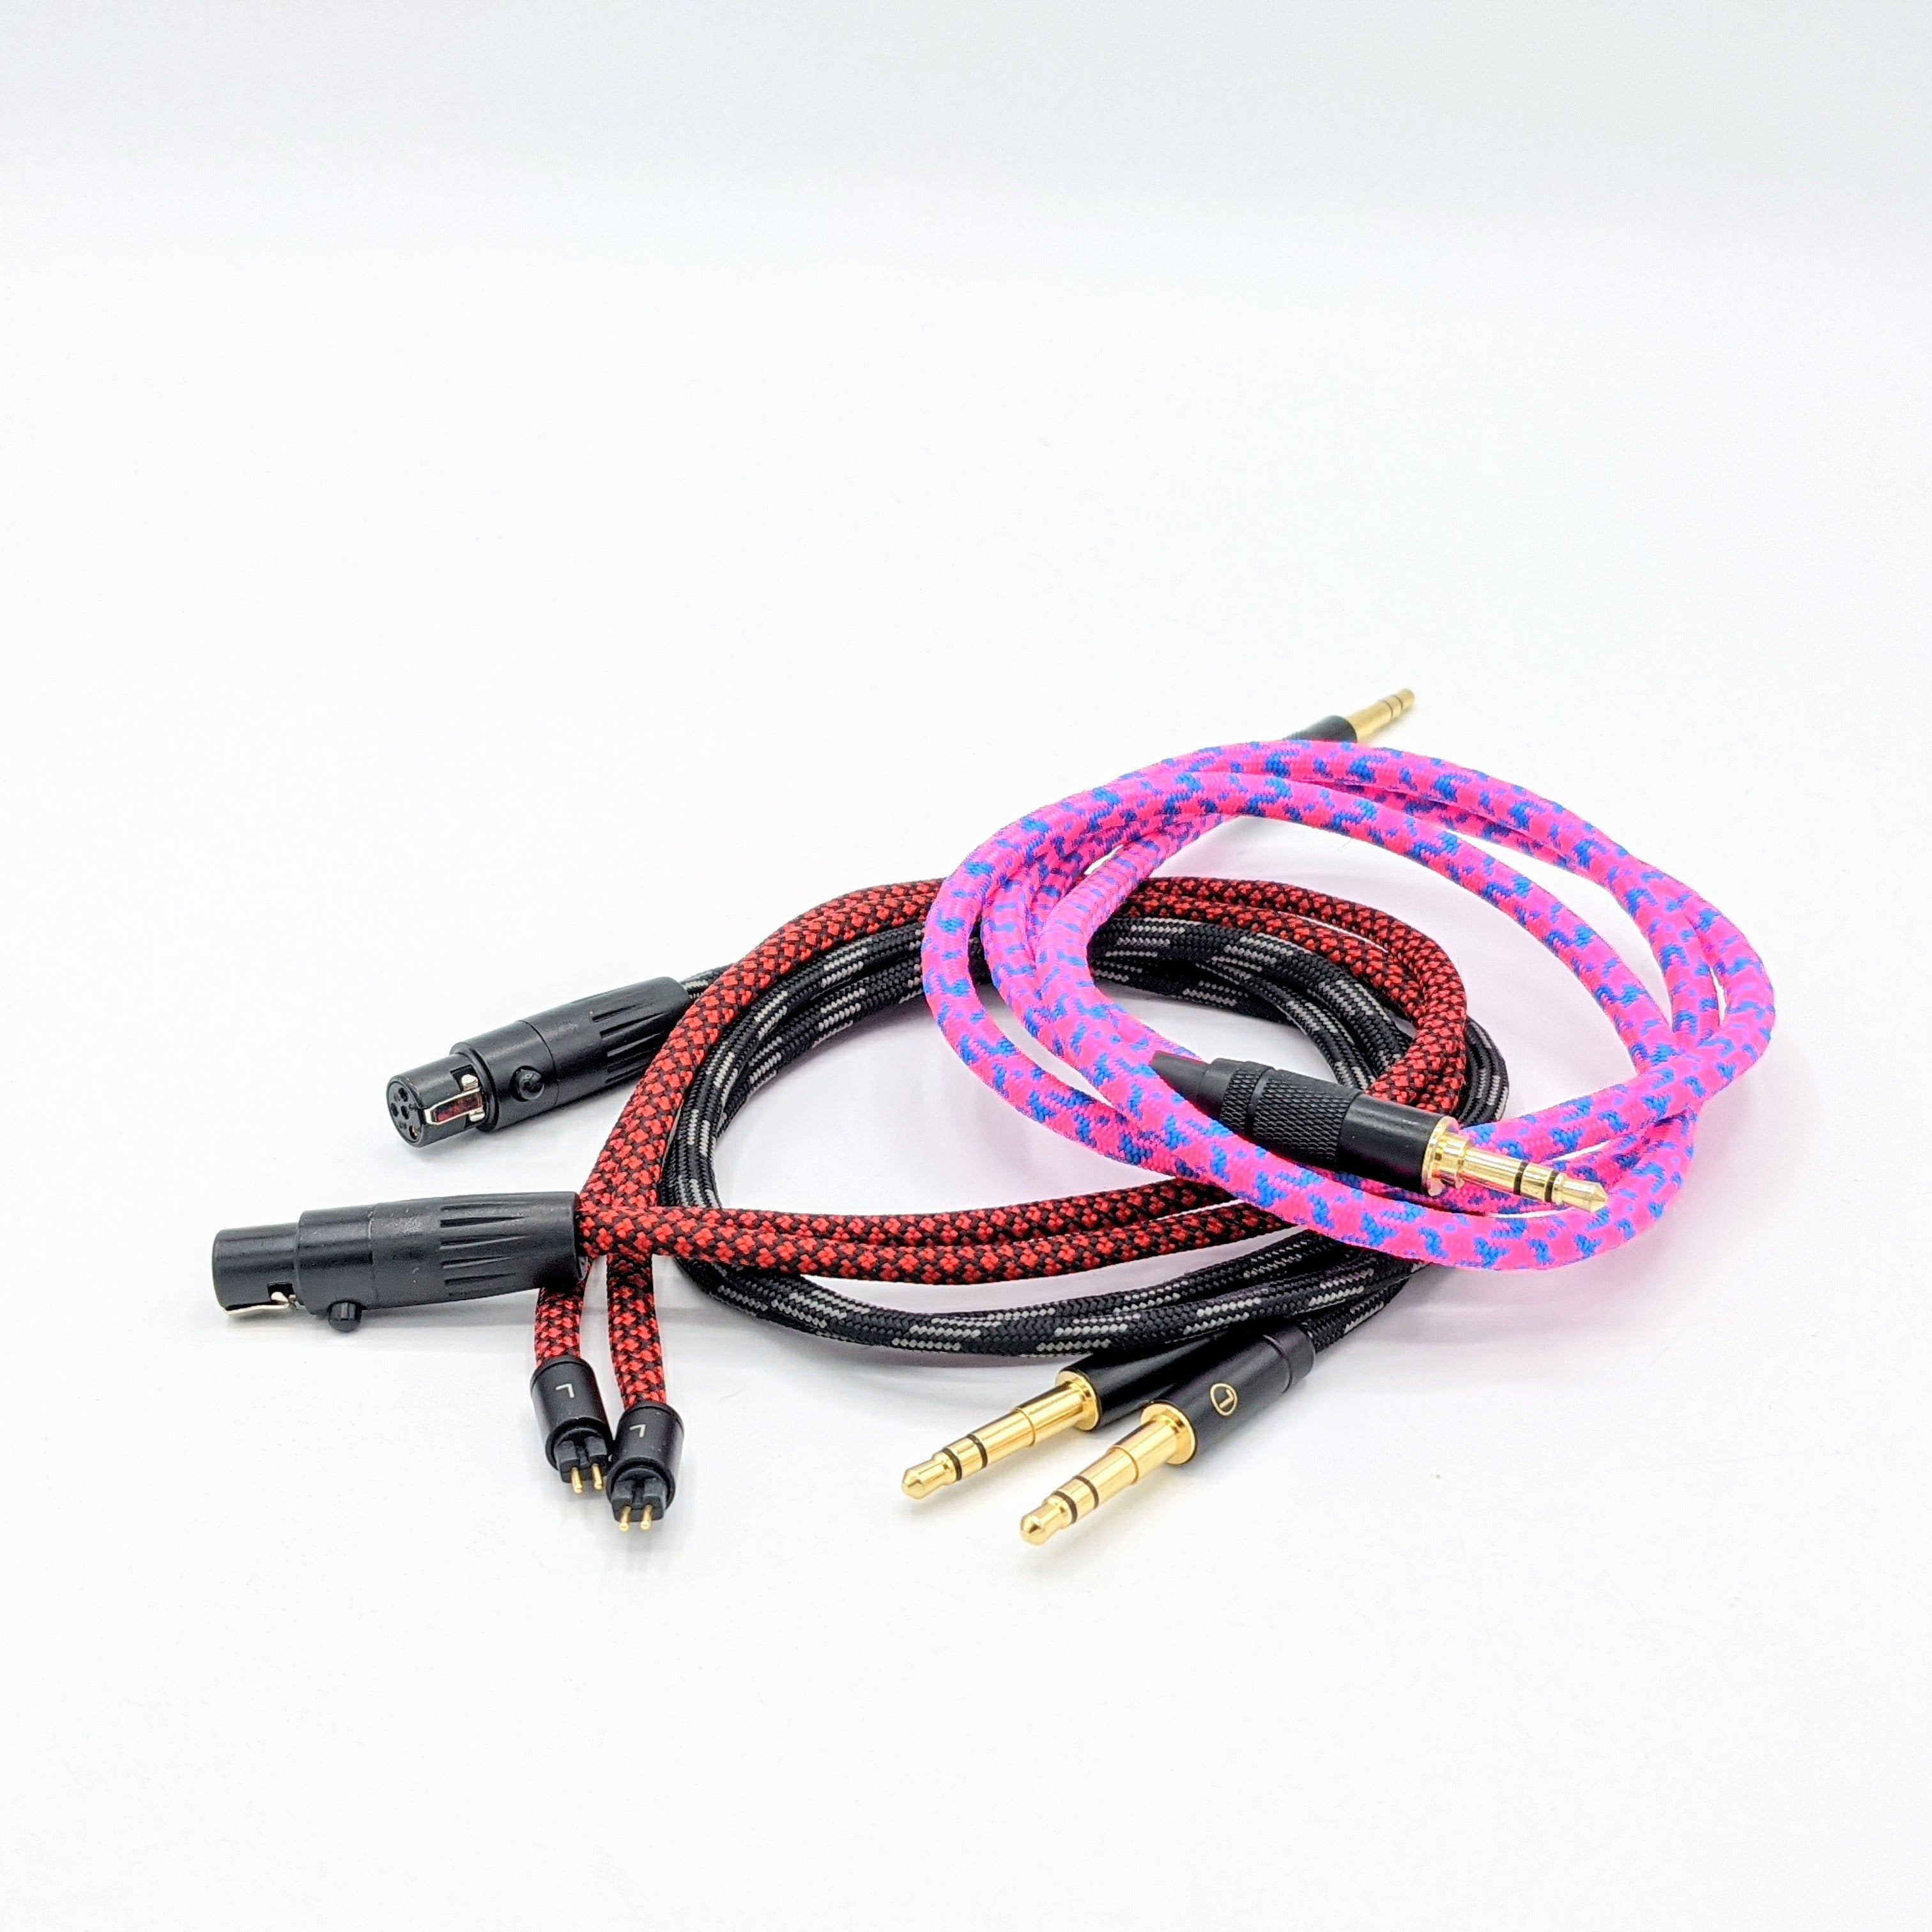 B Stock Standard Style Headphone Cable